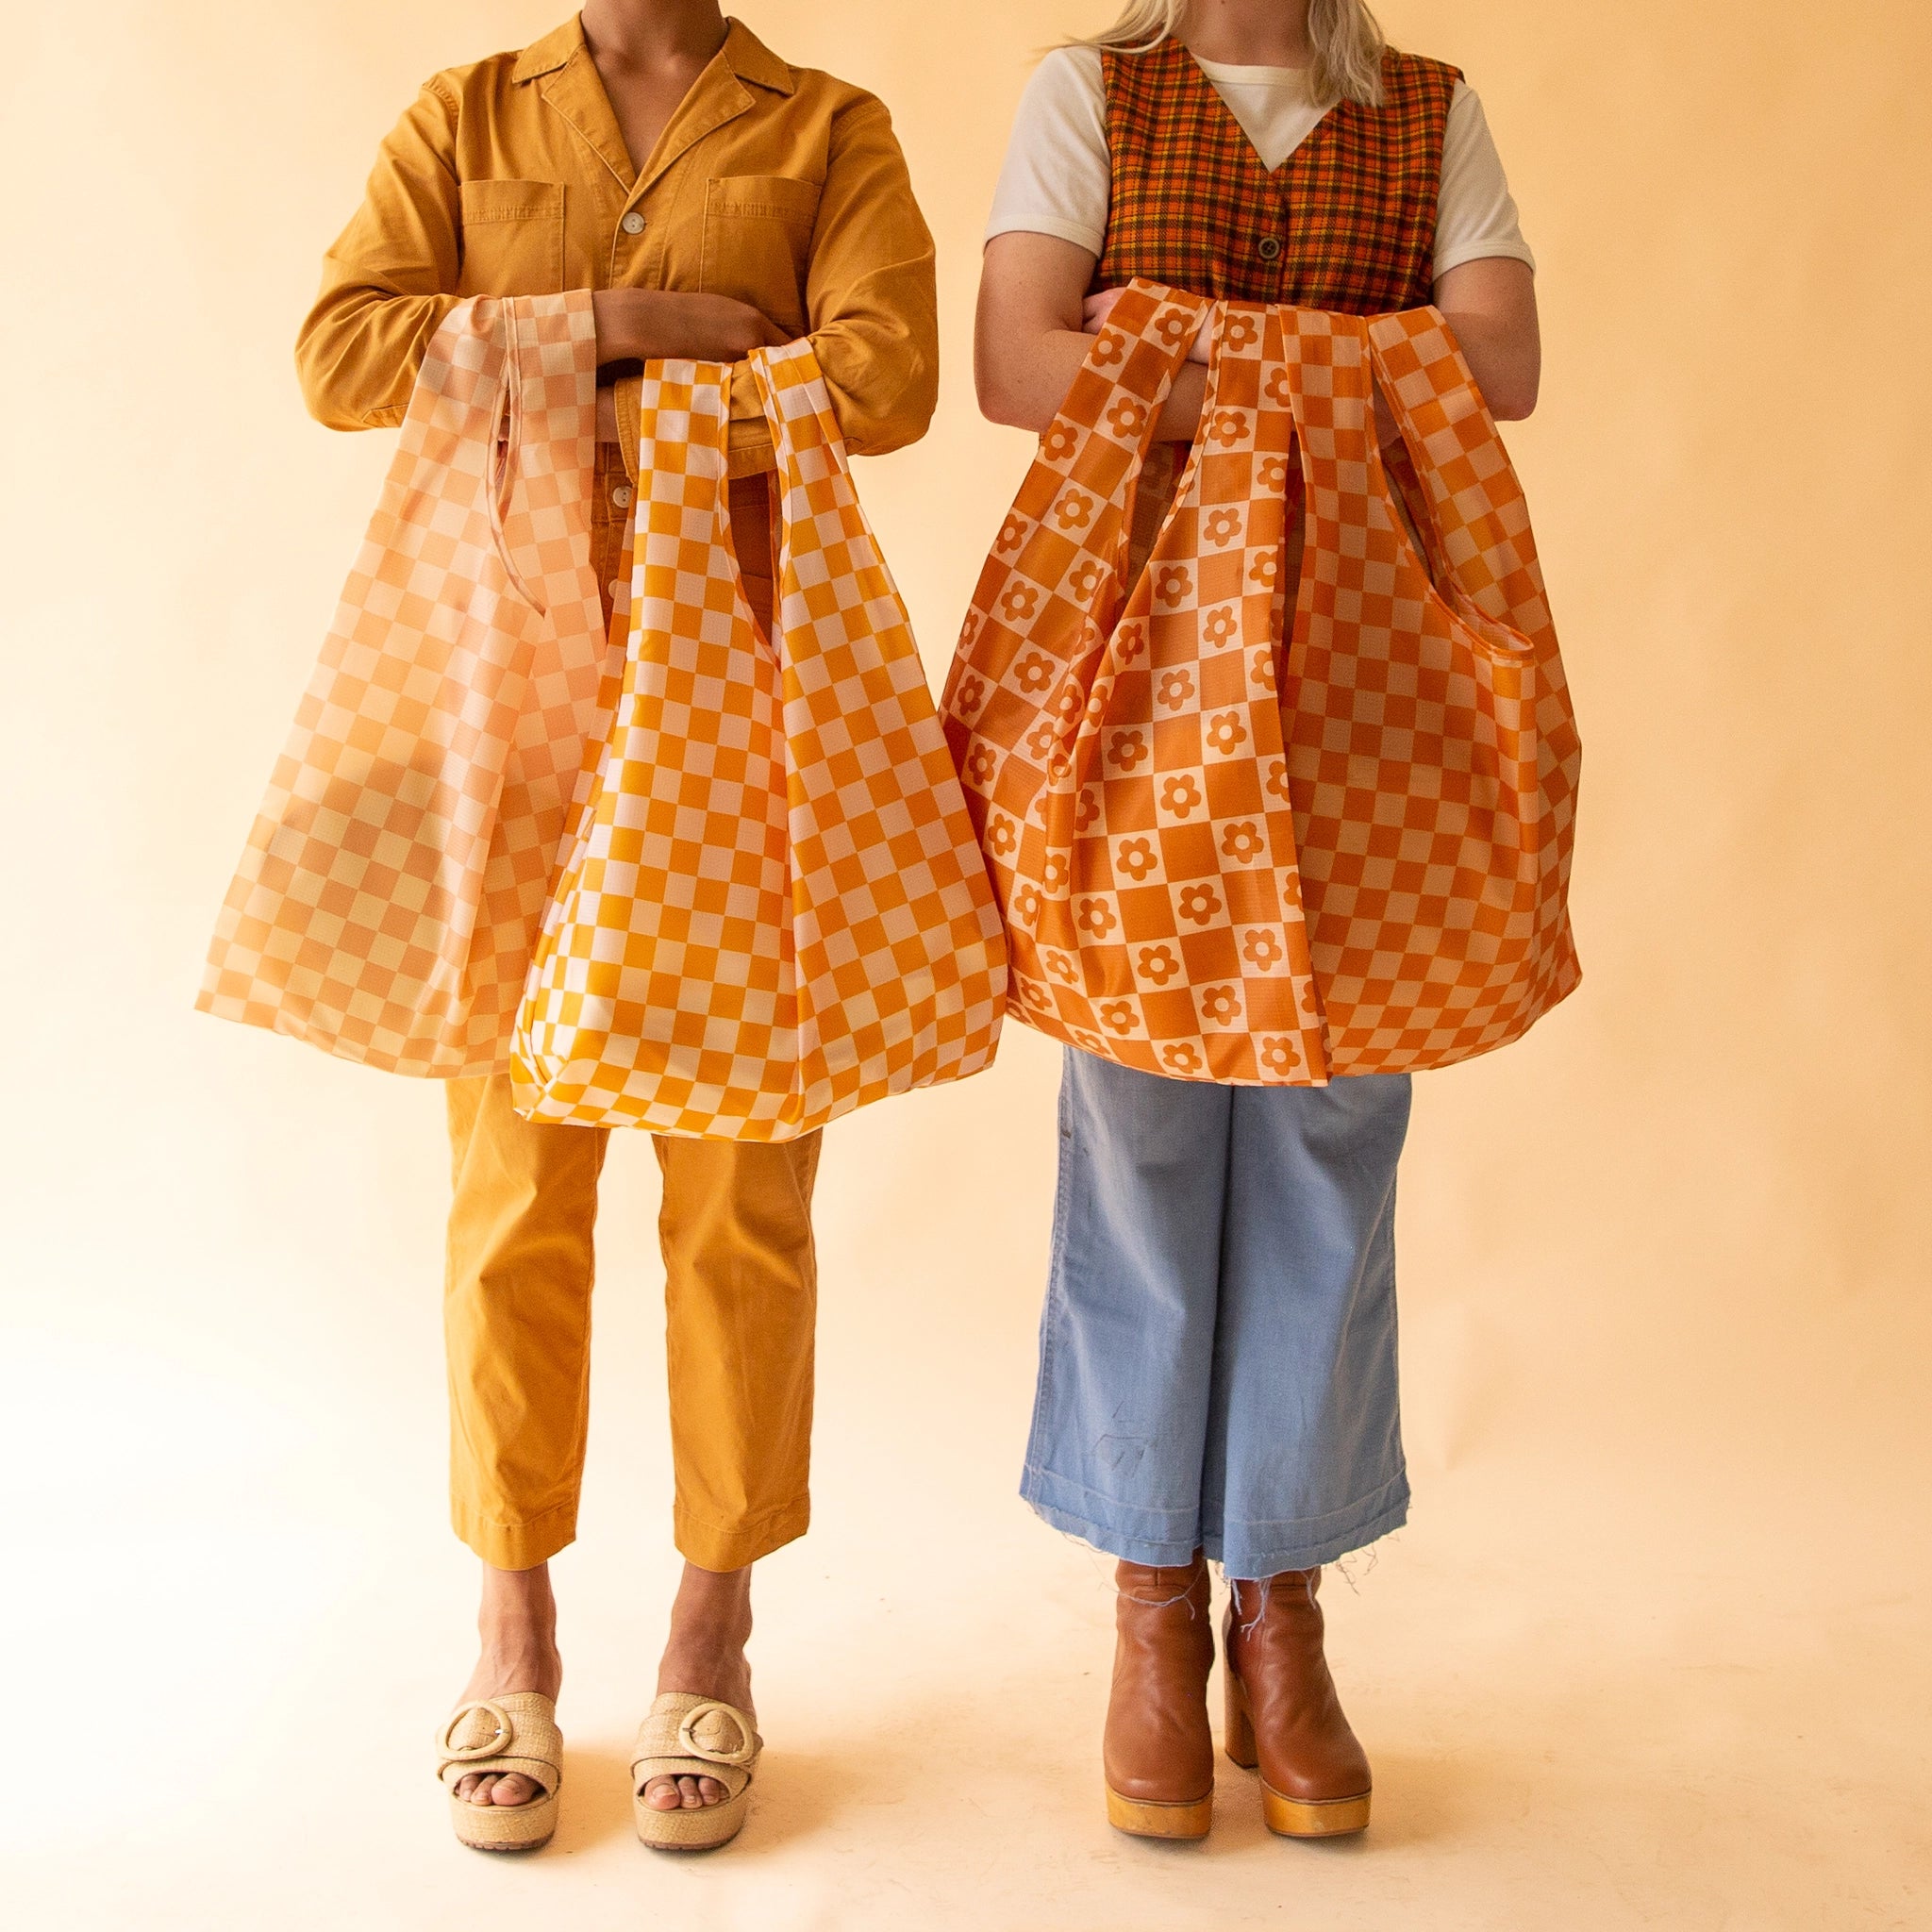 On a light orange background is a model holding the reusable bags. From left to right the models are holding, Dune Checkered, Marigold Checkered, Flower Checkered, and Playa Checkered.